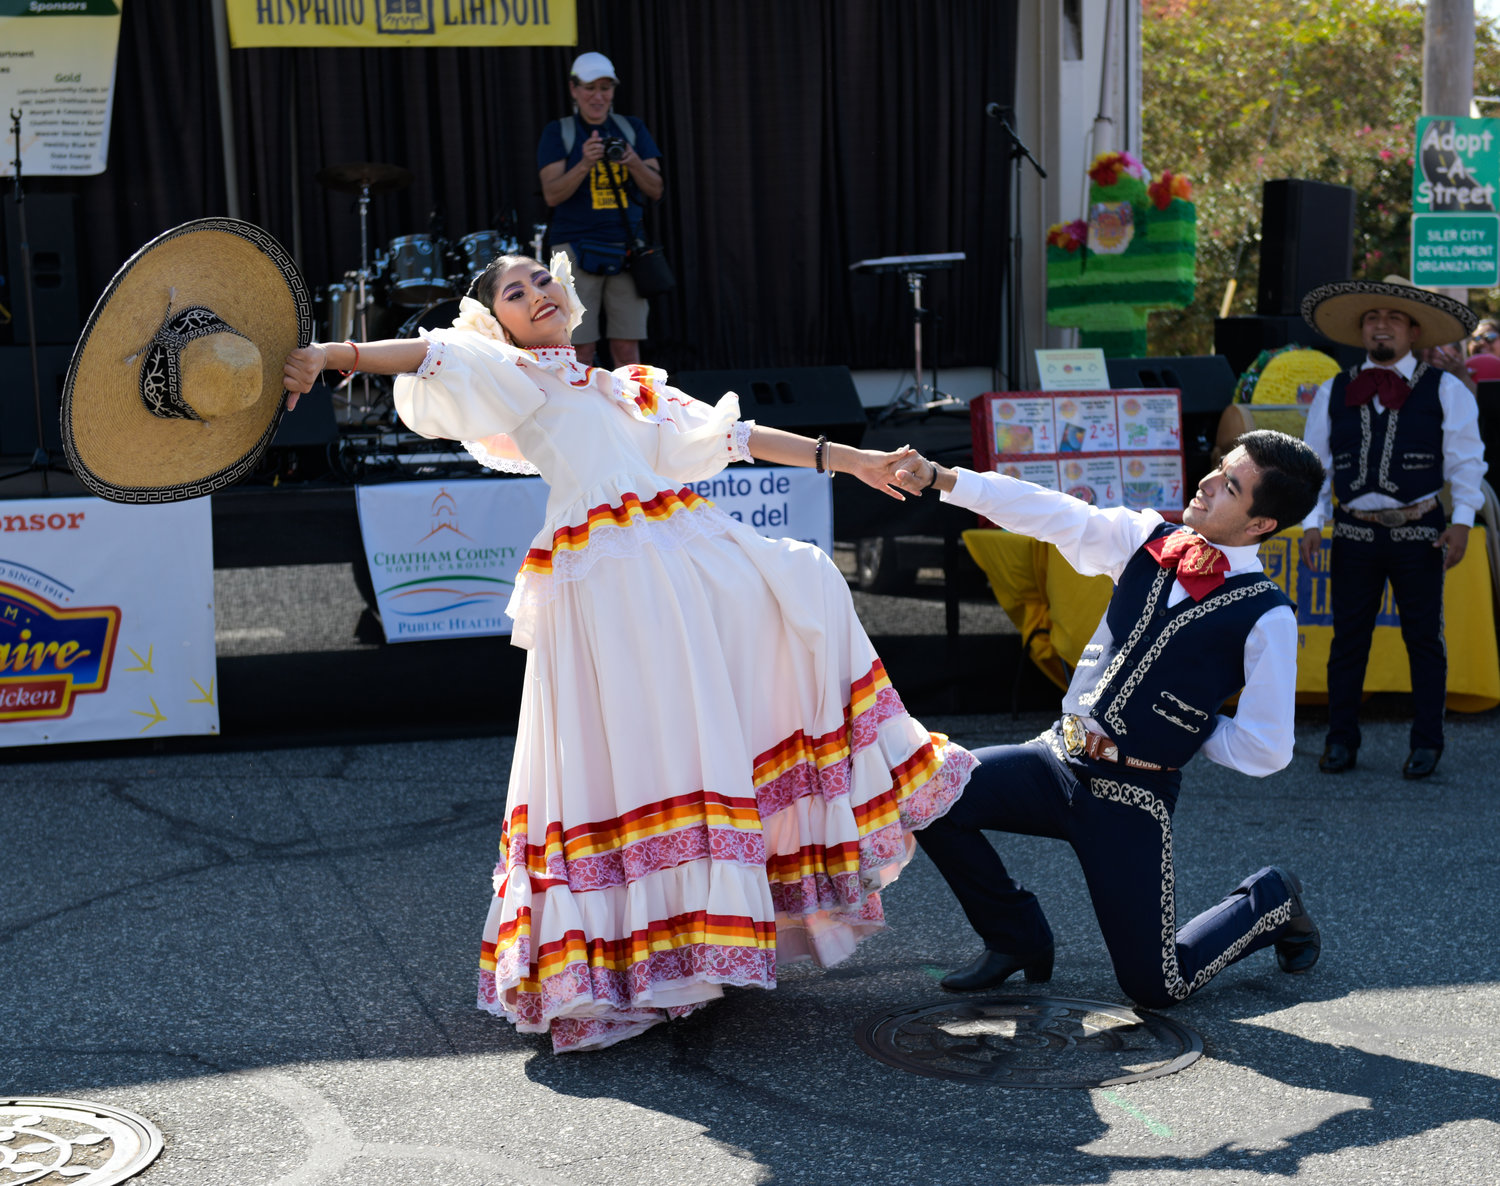 The Balet Folklorico captivated the audience at Saturday's Hispanic Heritage Festival. Balet Folklorico is a Mexican tradition made famous by Julio Ruiz.